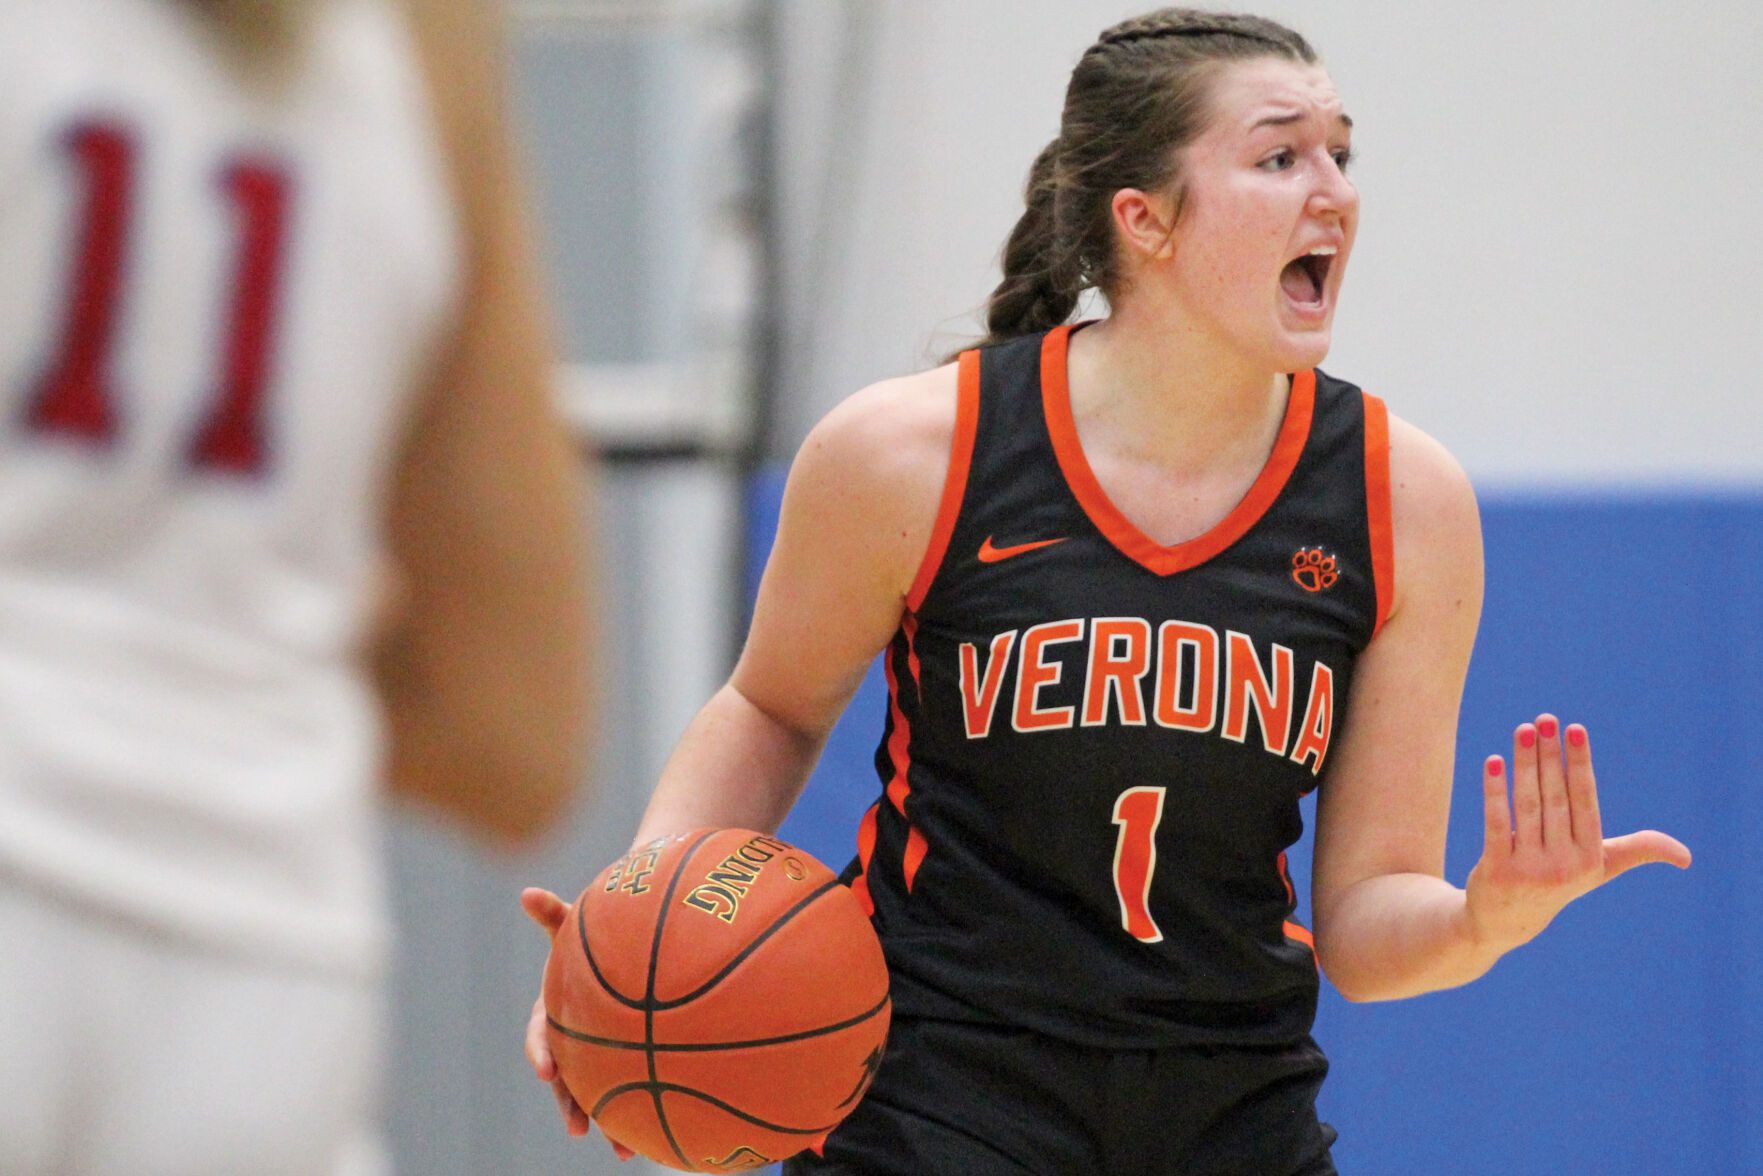 Girls basketball: Verona’s Taylor Stremlow named Big Eight Player of the Year